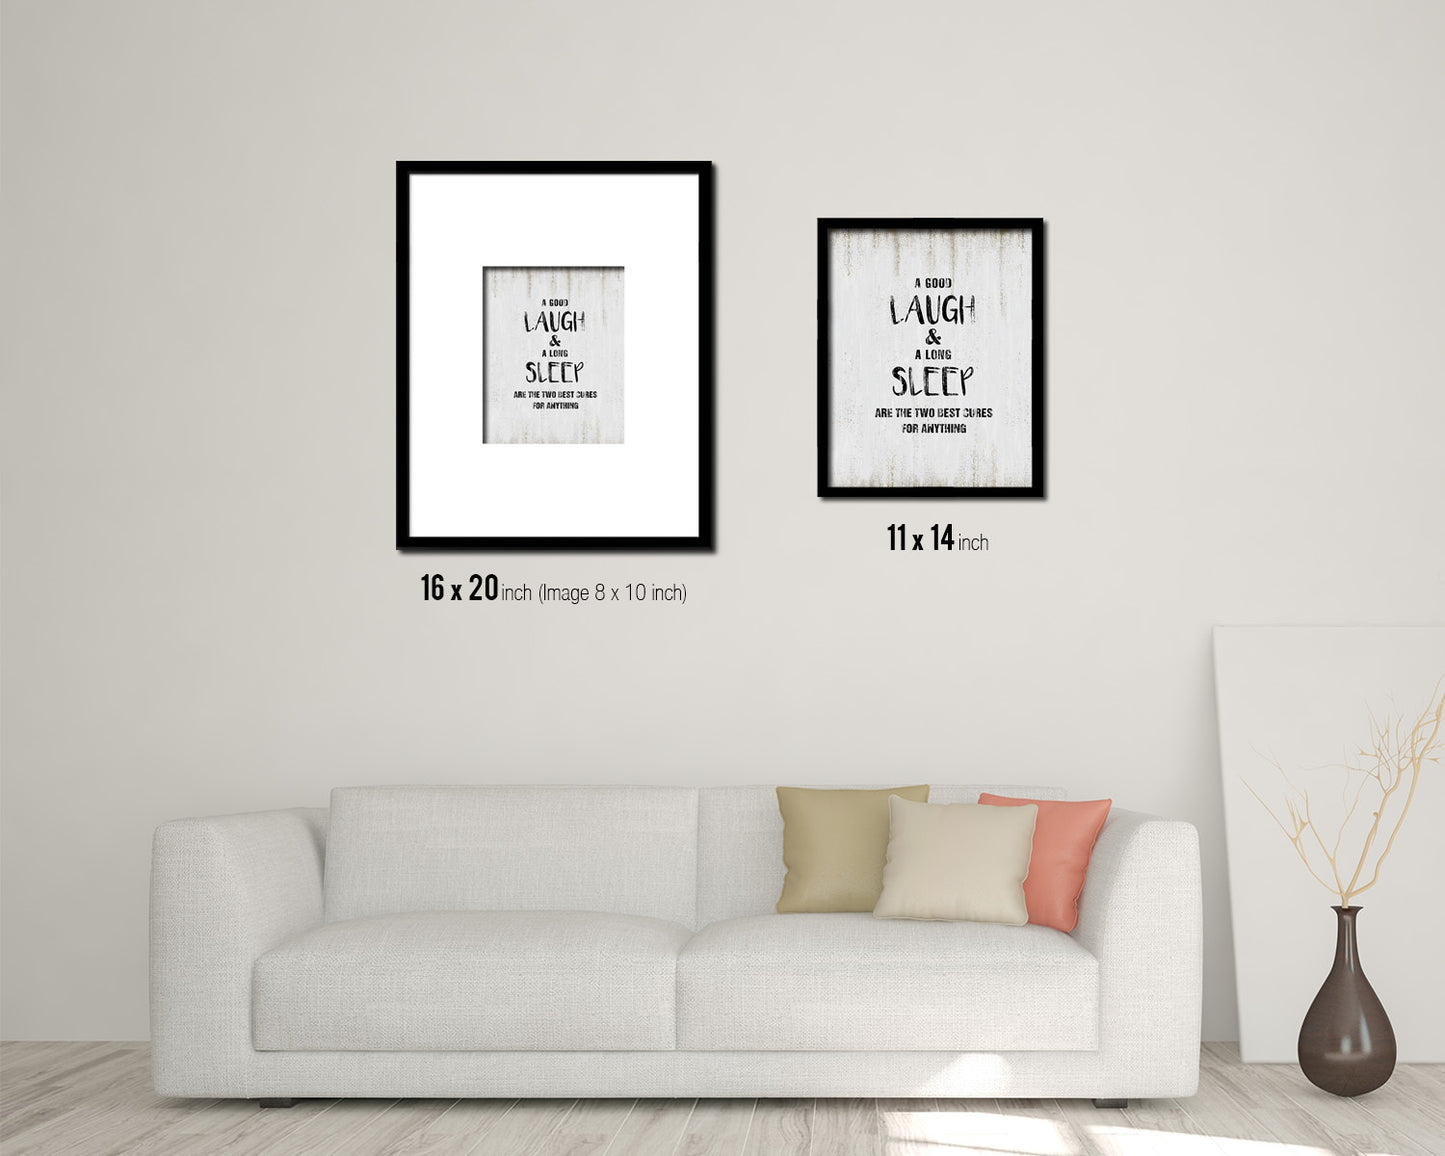 A good laugh Quote Wood Framed Print Wall Decor Art